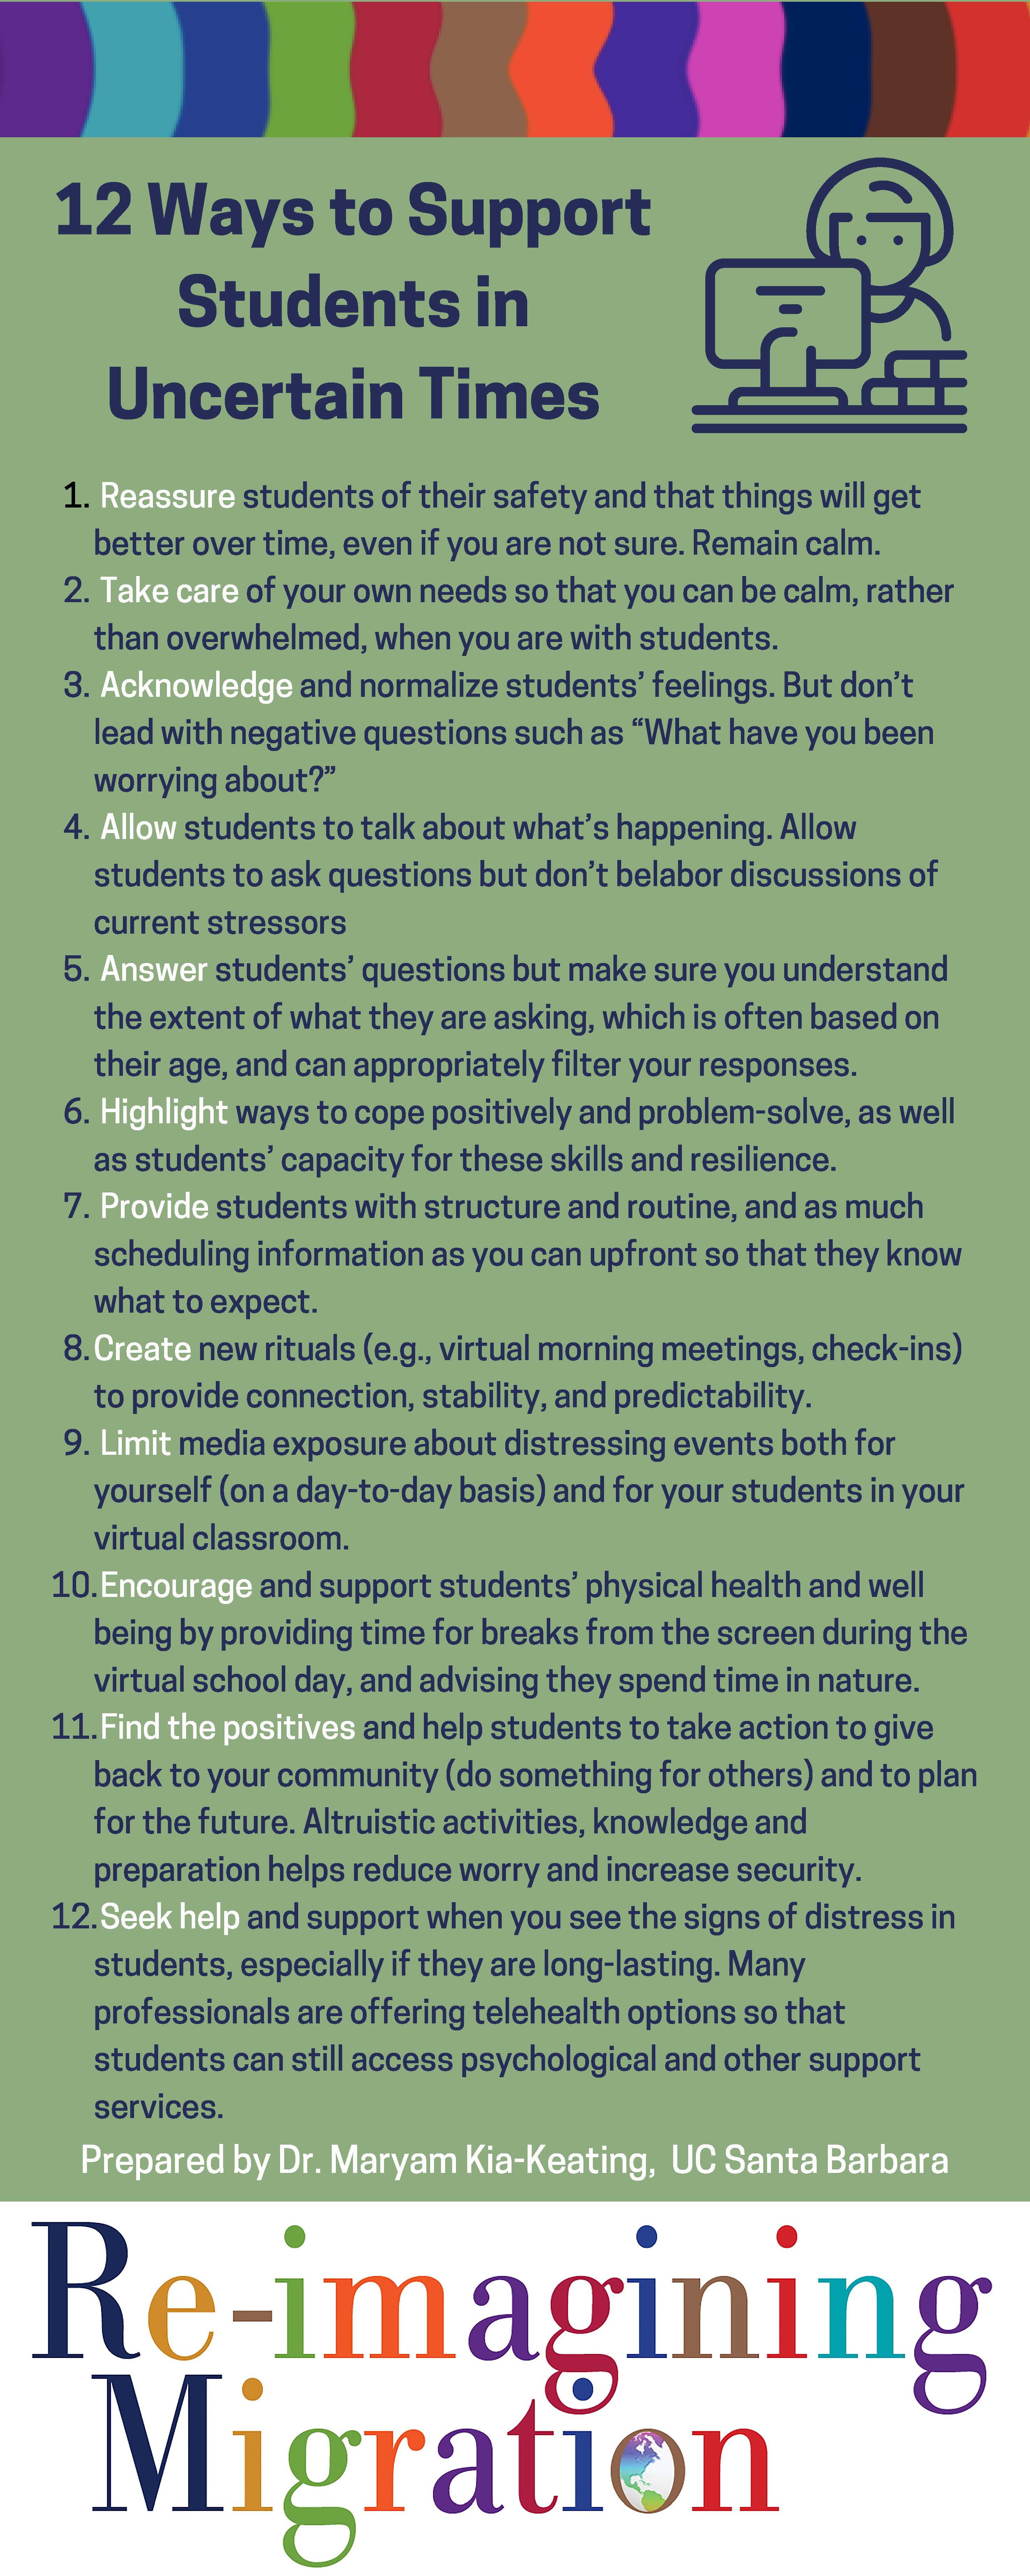 12 ways to support students in uncertain times